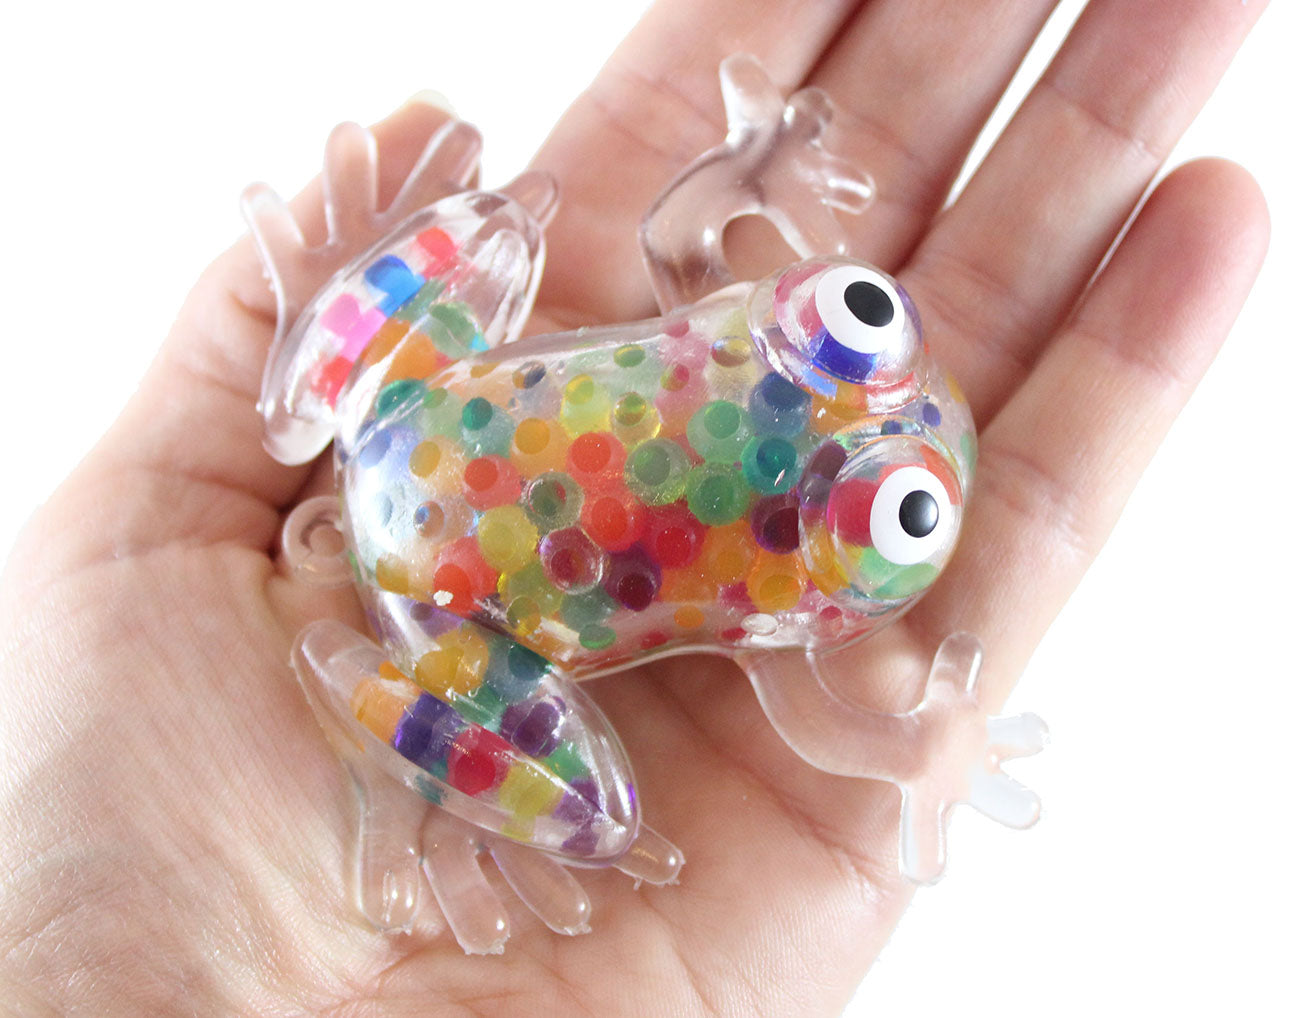 Curious Minds Busy 1 Cute Frog Rainbow Water Bead Filled Squeeze Stress Balls - Squishy Toy - Sensory Fidget